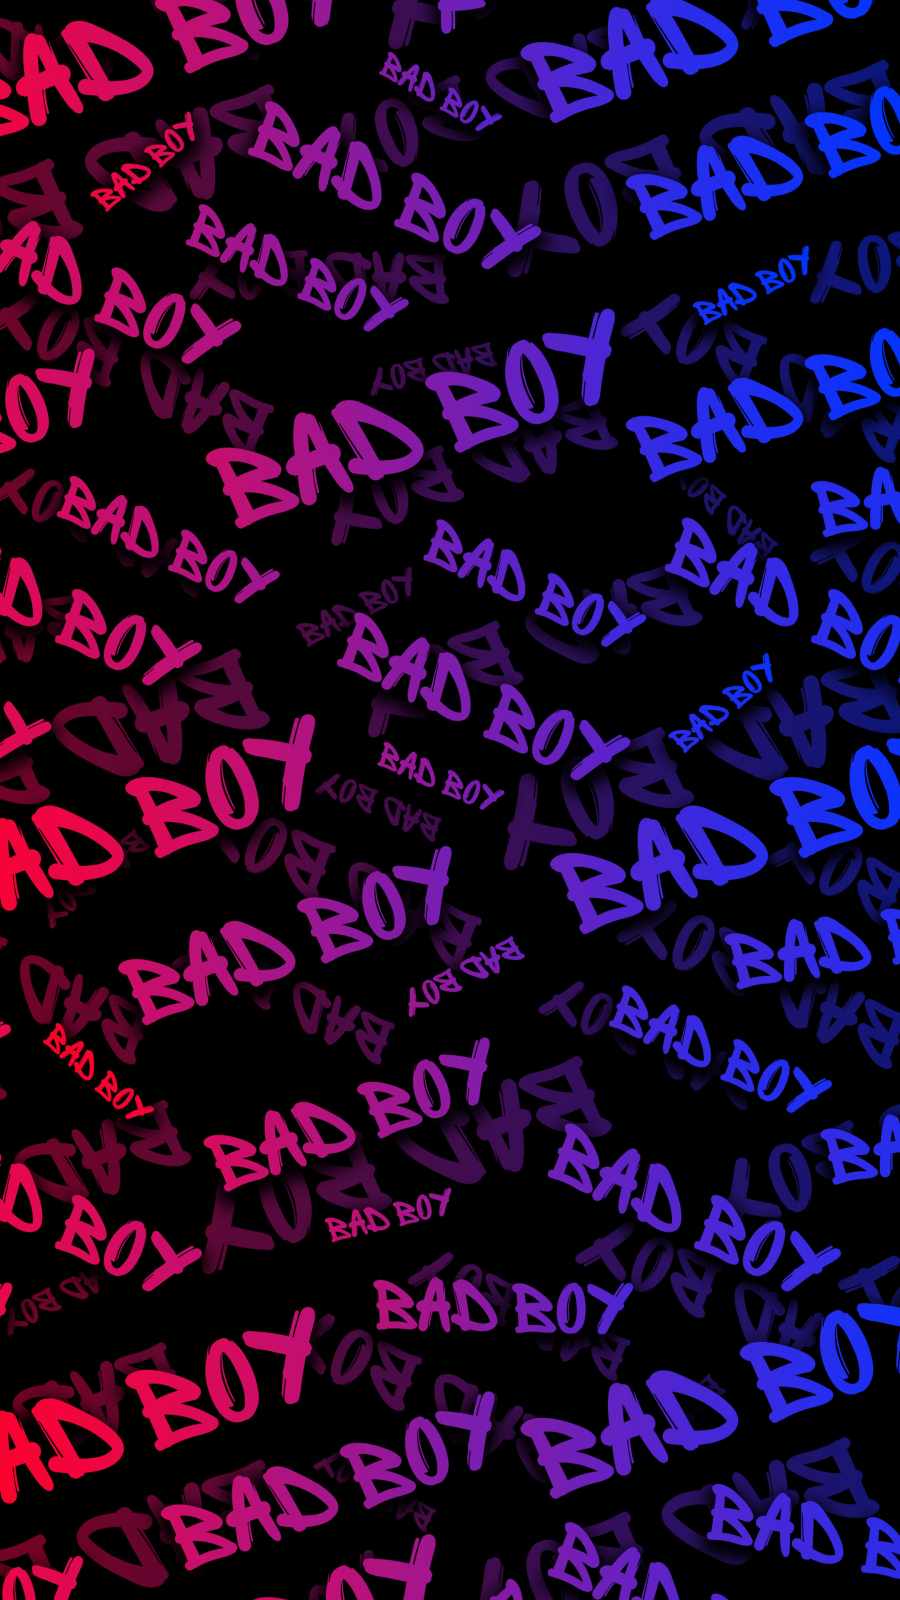 About A Boy Wallpapers